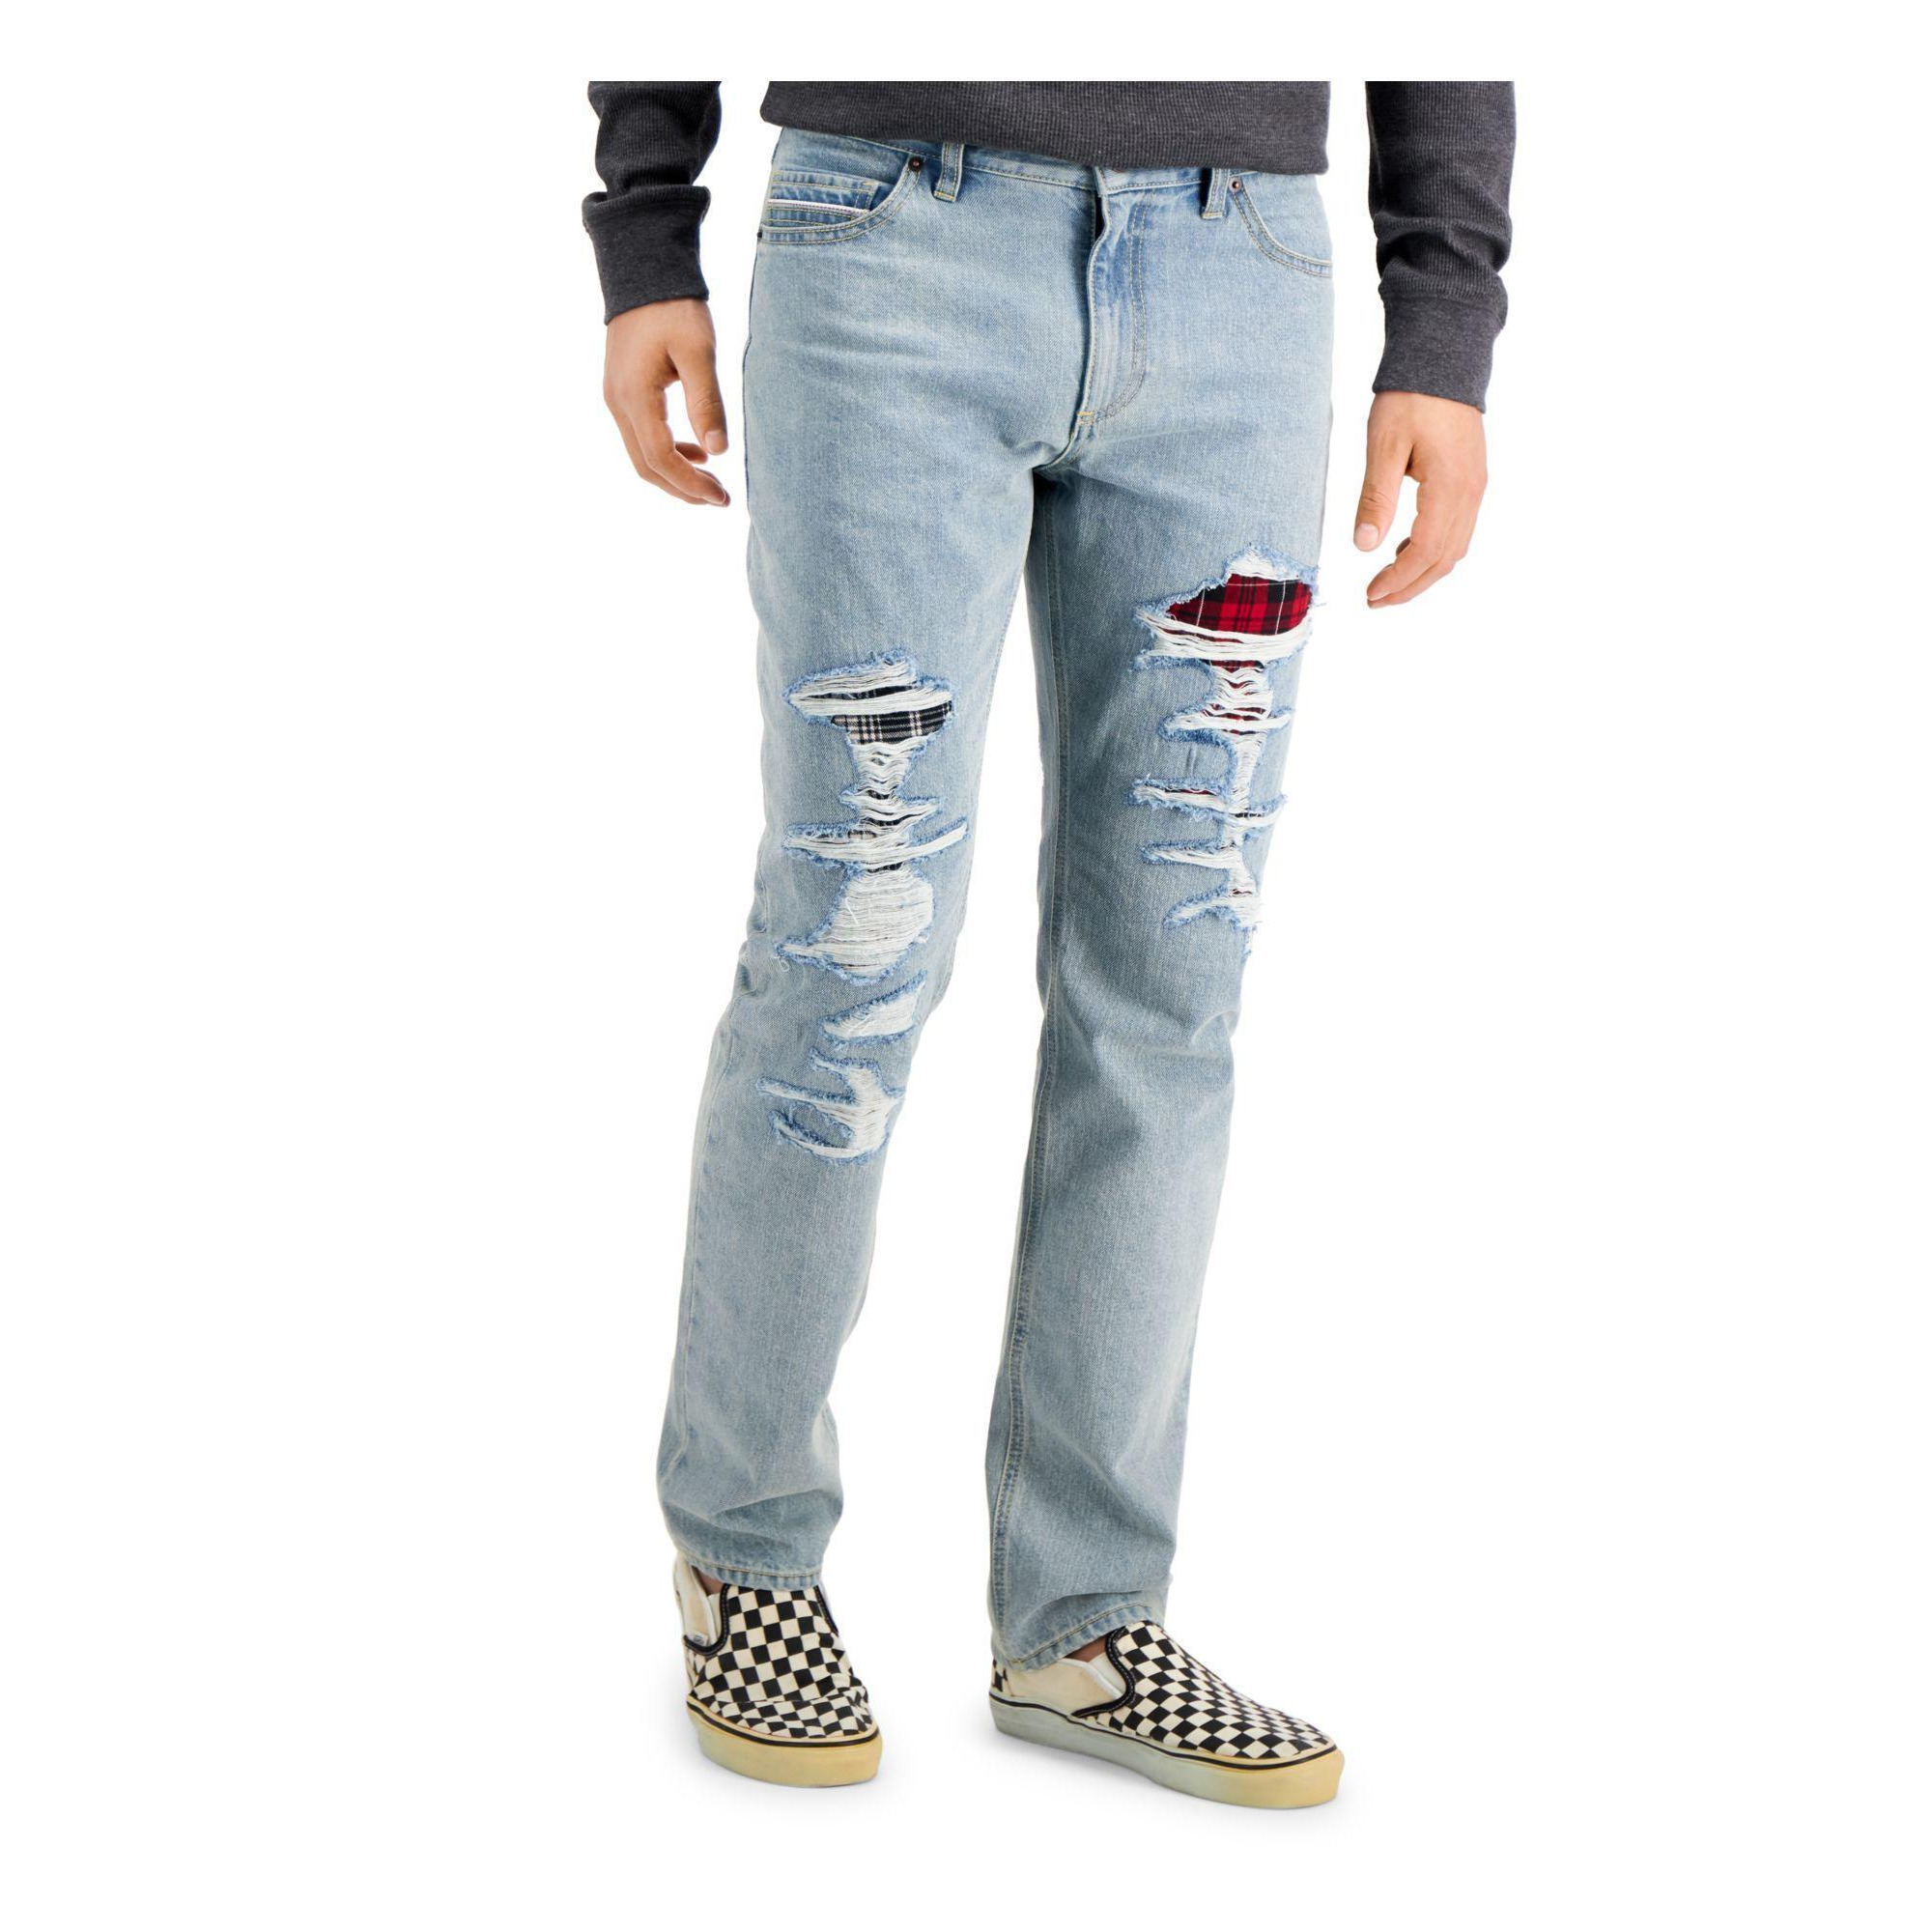 Buy Light Grey Straight Fit Mens Jeans Online